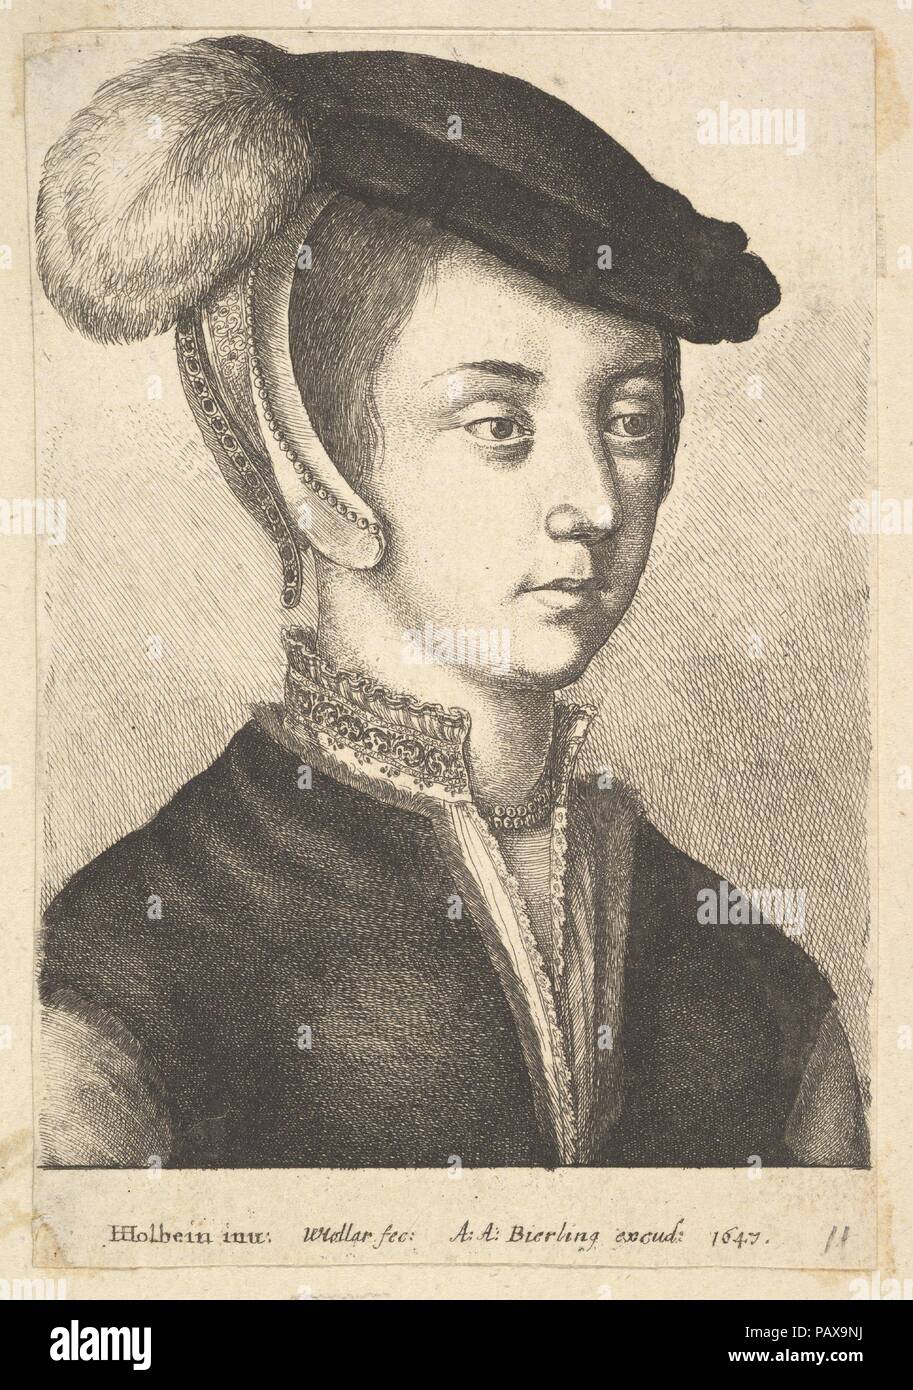 Young woman wearing a feathered cap. Artist: After Hans Holbein the Younger (German, Augsburg 1497/98-1543 London). Dimensions: Sheet: 5 3/16 × 3 9/16 in. (13.2 × 9 cm)  cut mostly outside image but within platemark. Etcher: Wenceslaus Hollar (Bohemian, Prague 1607-1677 London). Date: 1647.  Portrait of a young woman, bust-length, directed and looking to right; wearing a dark plumed cap over jewelled head-dress, pearl necklace, fur-trimmed waistcoat over blouse with embroidered standing collar; after Hans Holbein the Younger. Museum: Metropolitan Museum of Art, New York, USA. Stock Photo